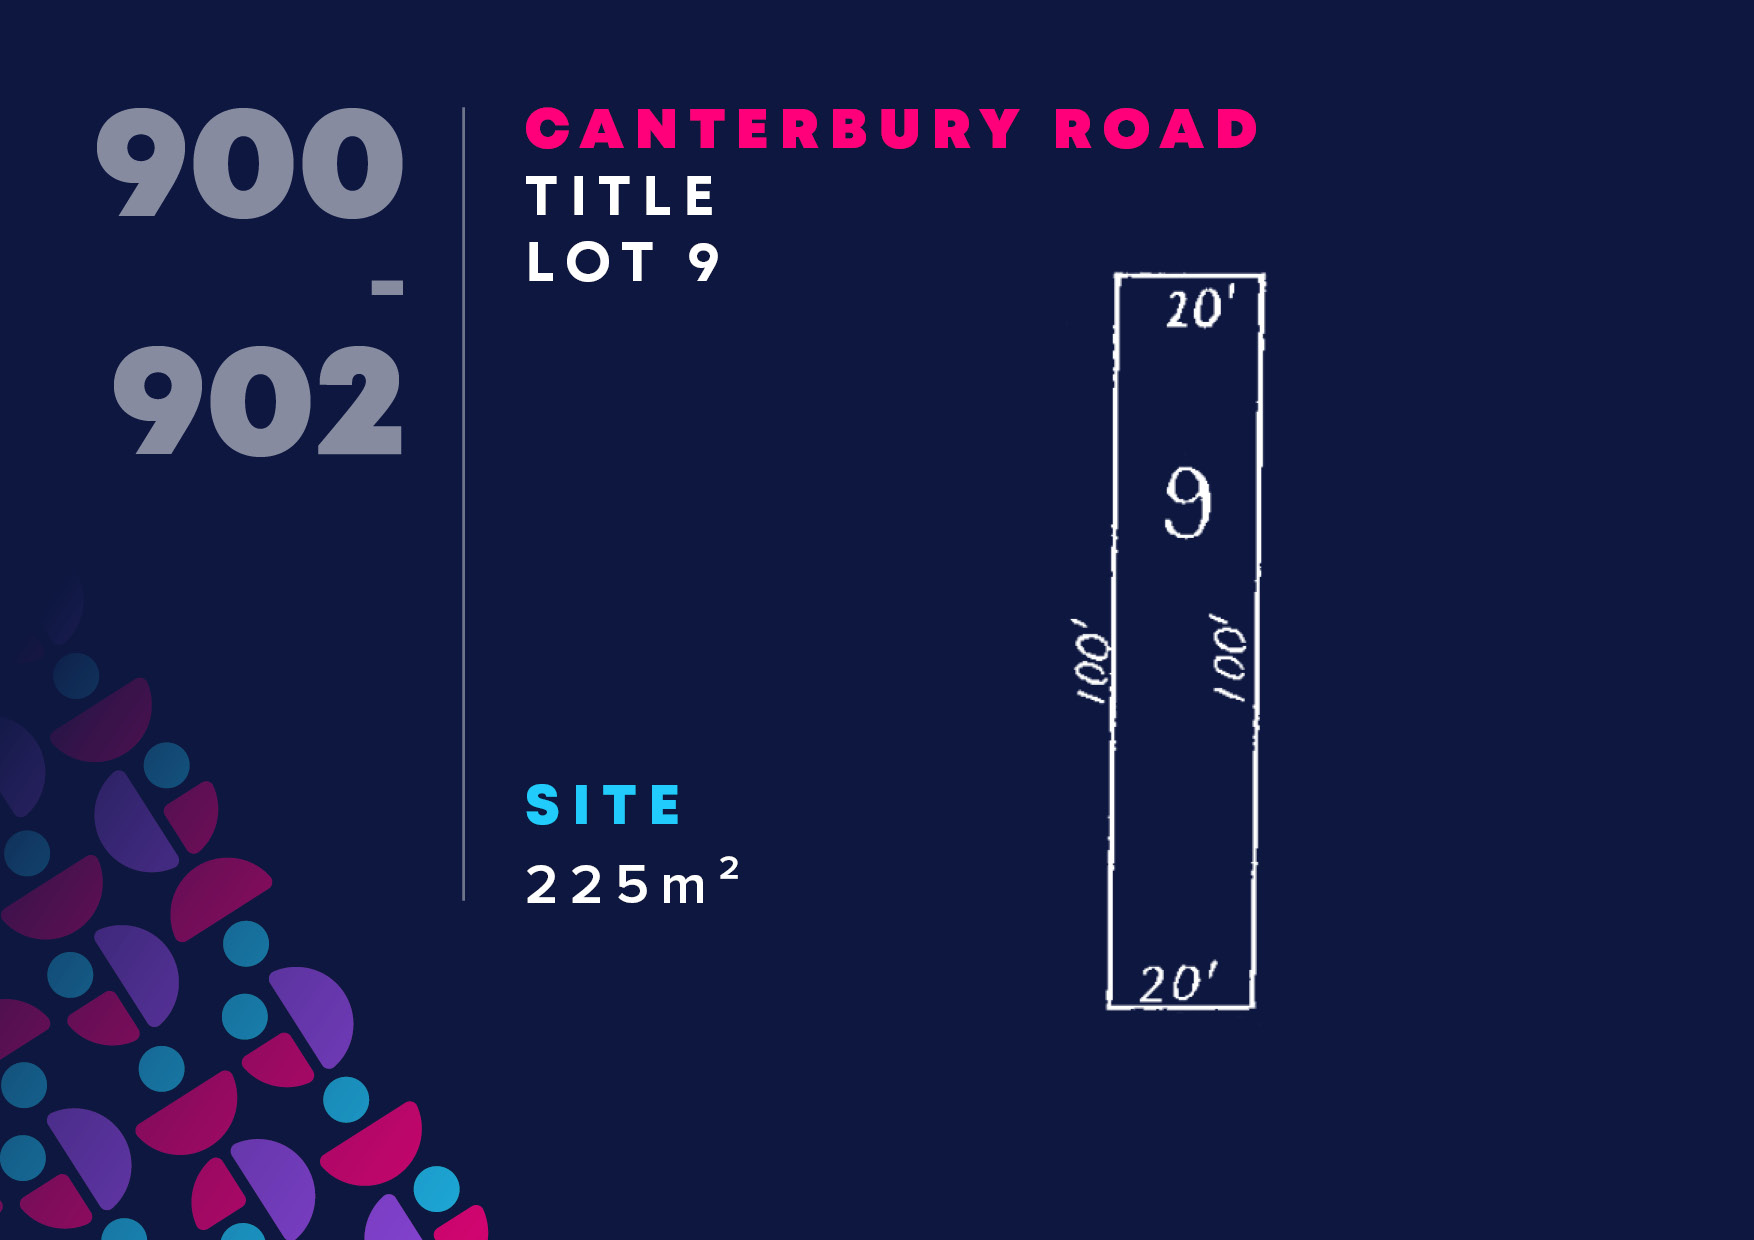 Sale 900-902 Canterbury Road Box Hill Development Commercial Real Estate TCI South